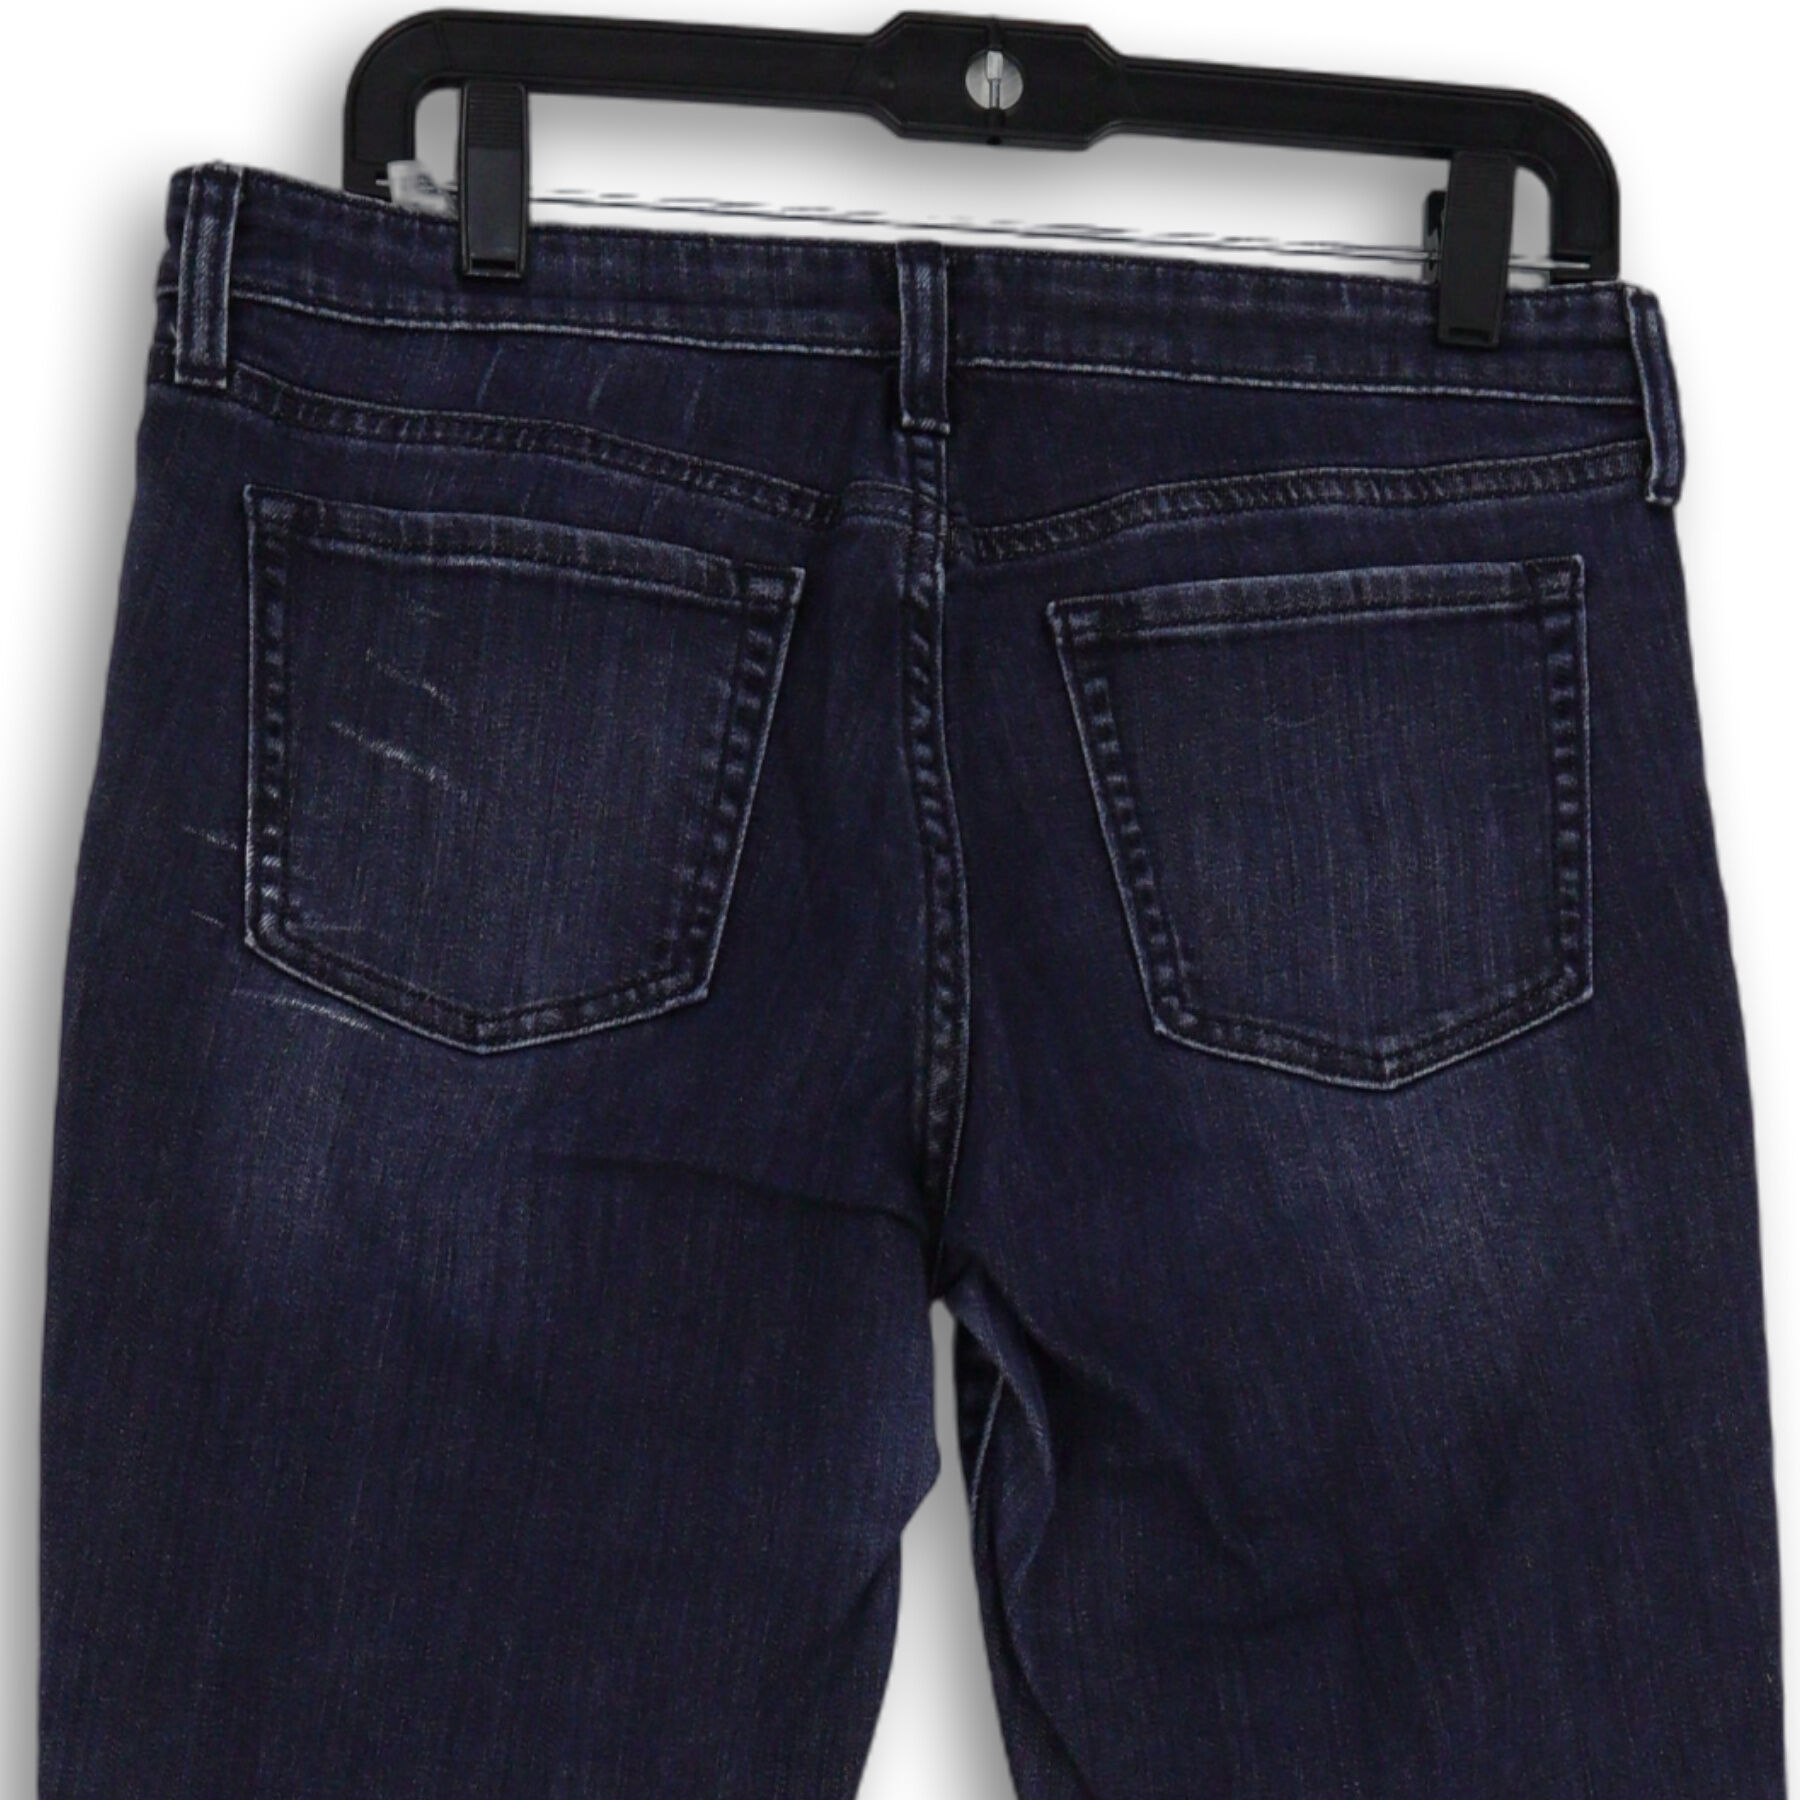 Buy the Womens Blue Coupe Toujours Svelte Always Skinny Leg Jeans